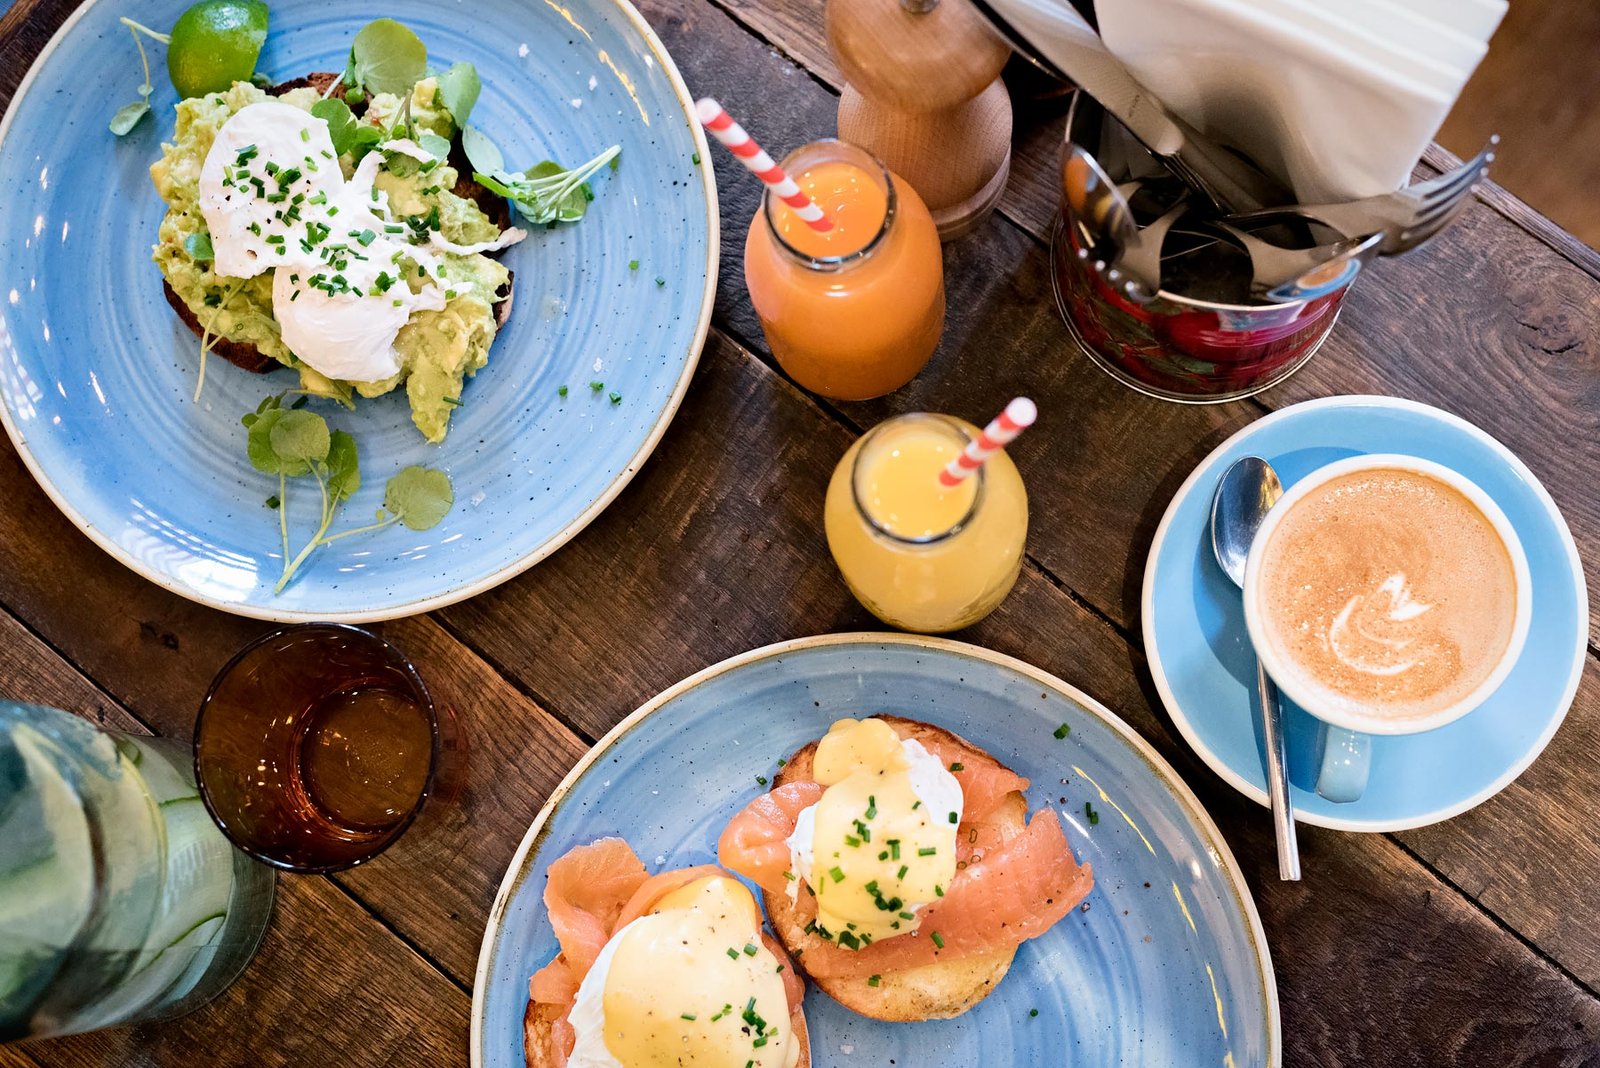 The Cambridge Street Kitchen | Amazing place for brunch in Pimlico, London